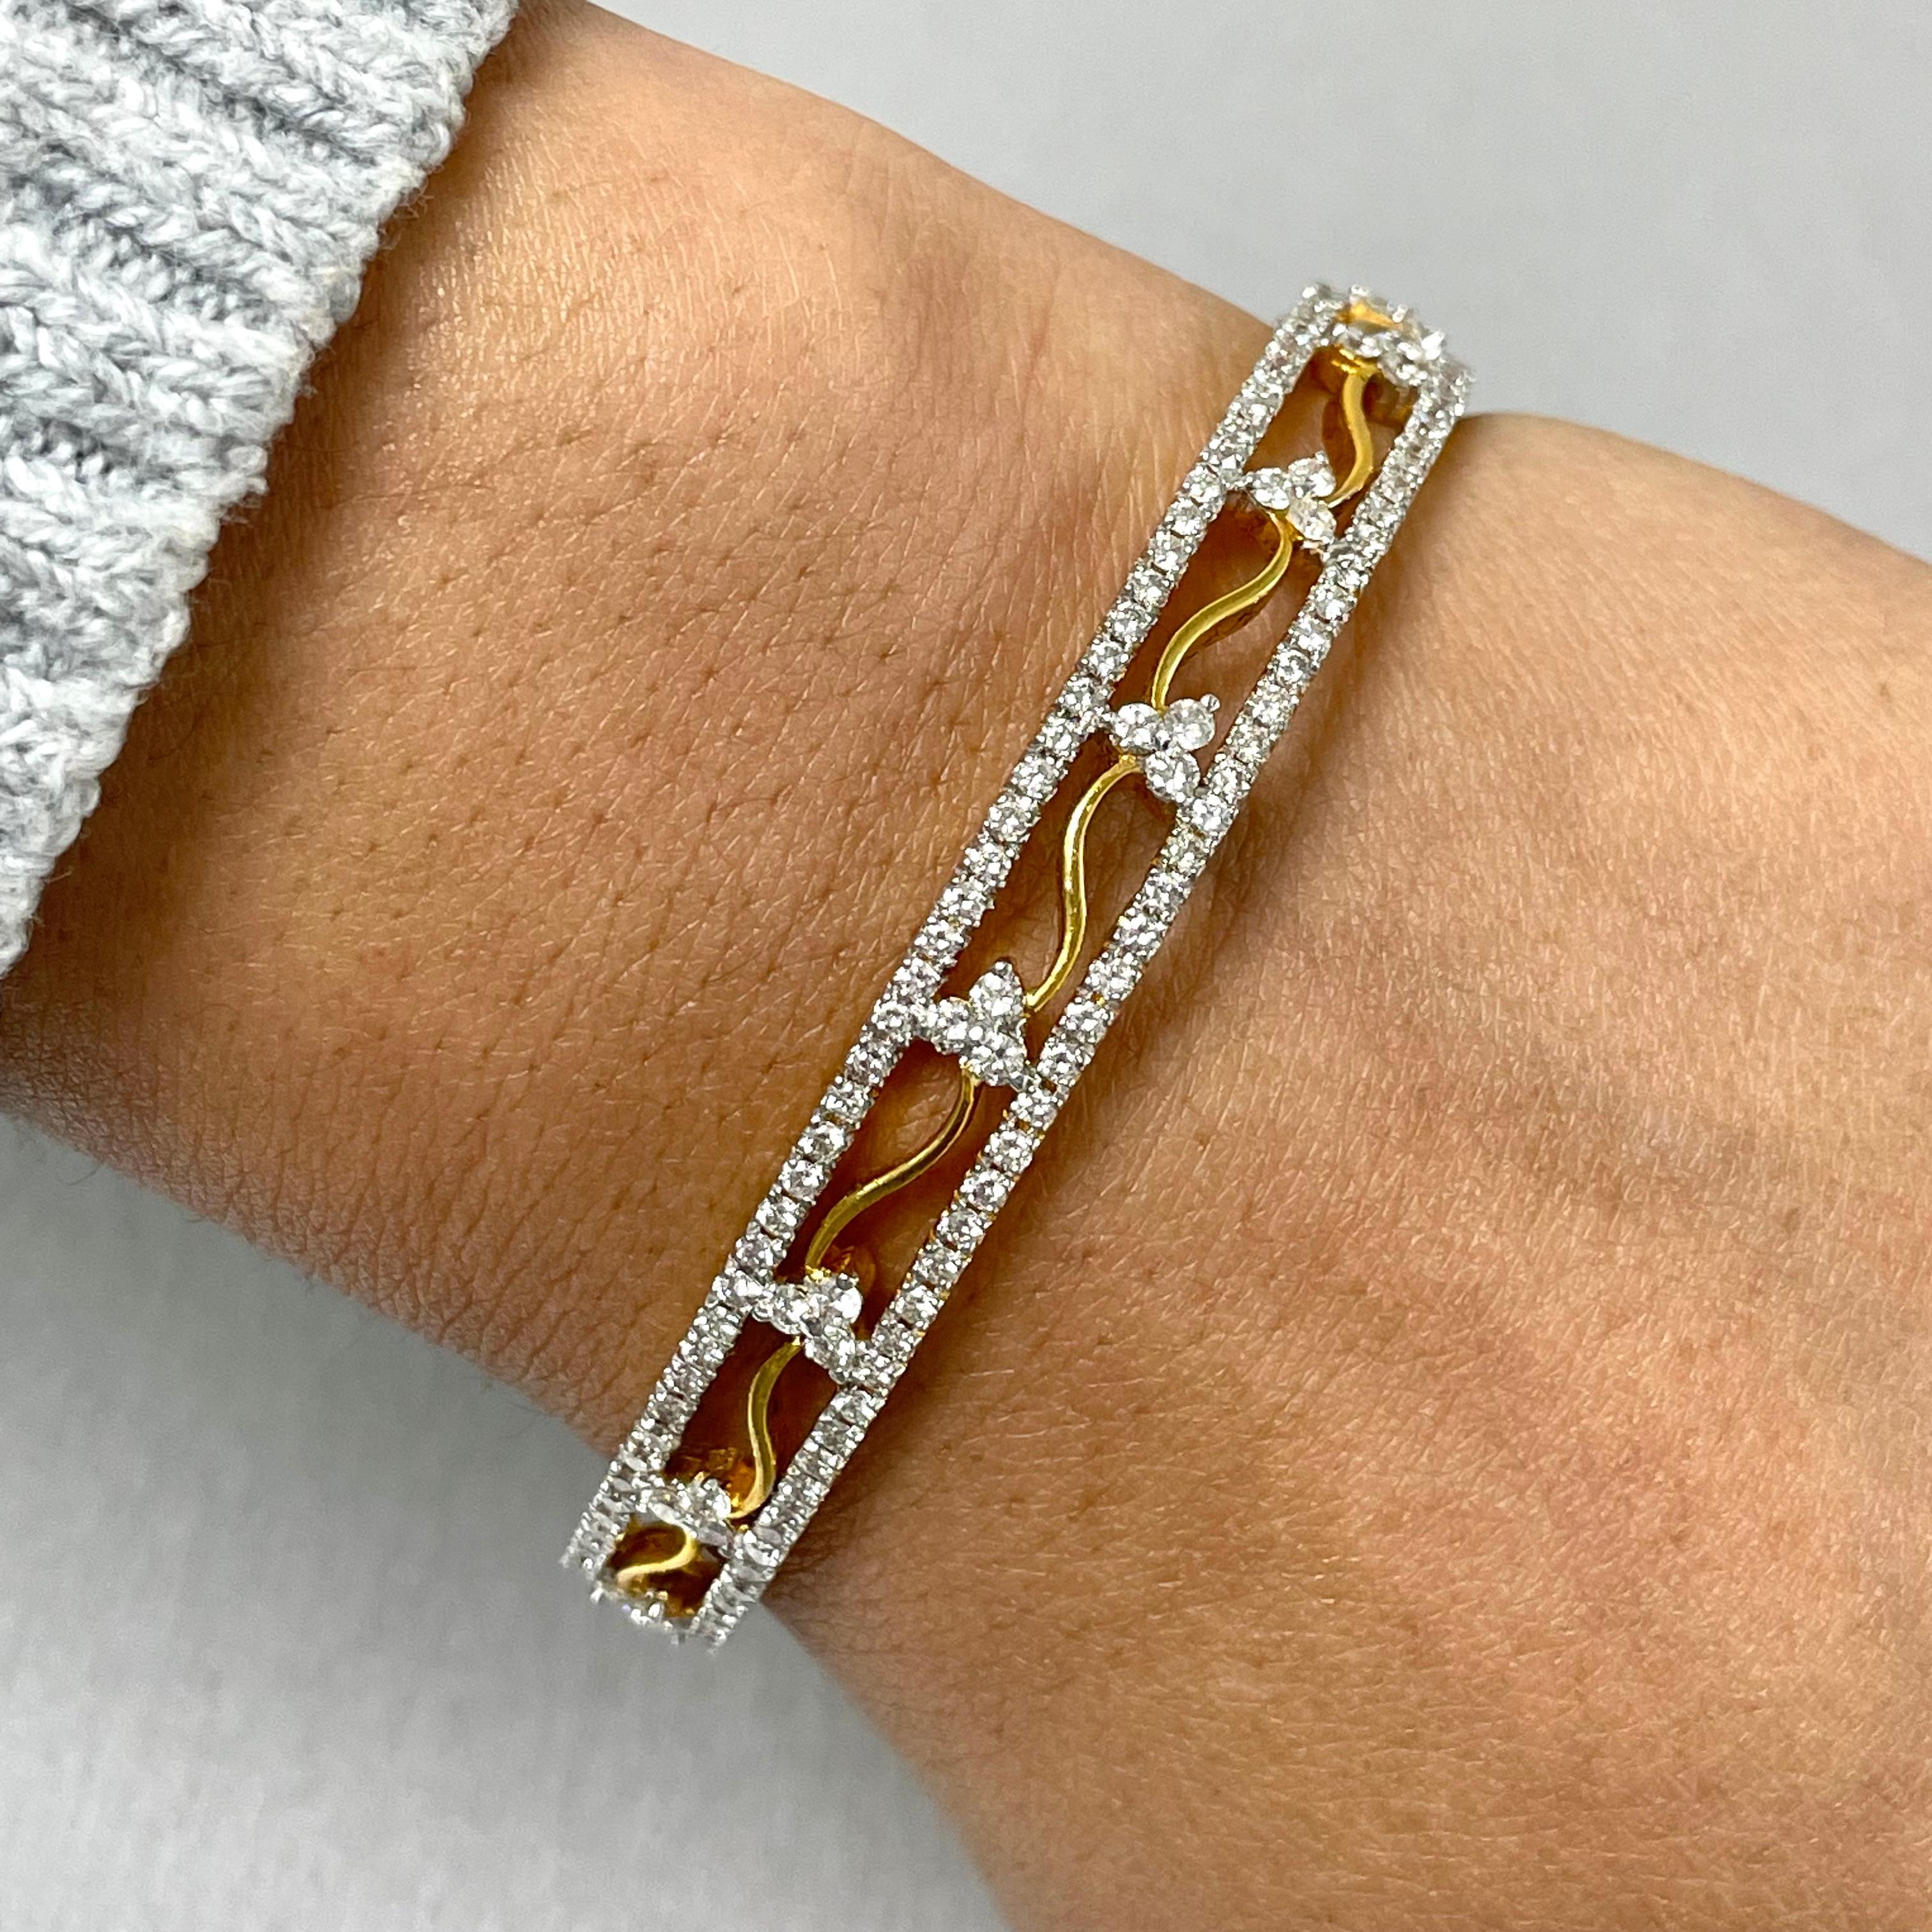 The Sheena Bangles draw on Indian heritage with their sweet flowery details and gentle curves. They are a sweet and elegant pair.

Total Diamond Weight: 10.59 ct 
No. of Diamonds: 552 
Diamond Color: G - H
Diamond Clarity: VS - SI (Very Slightly